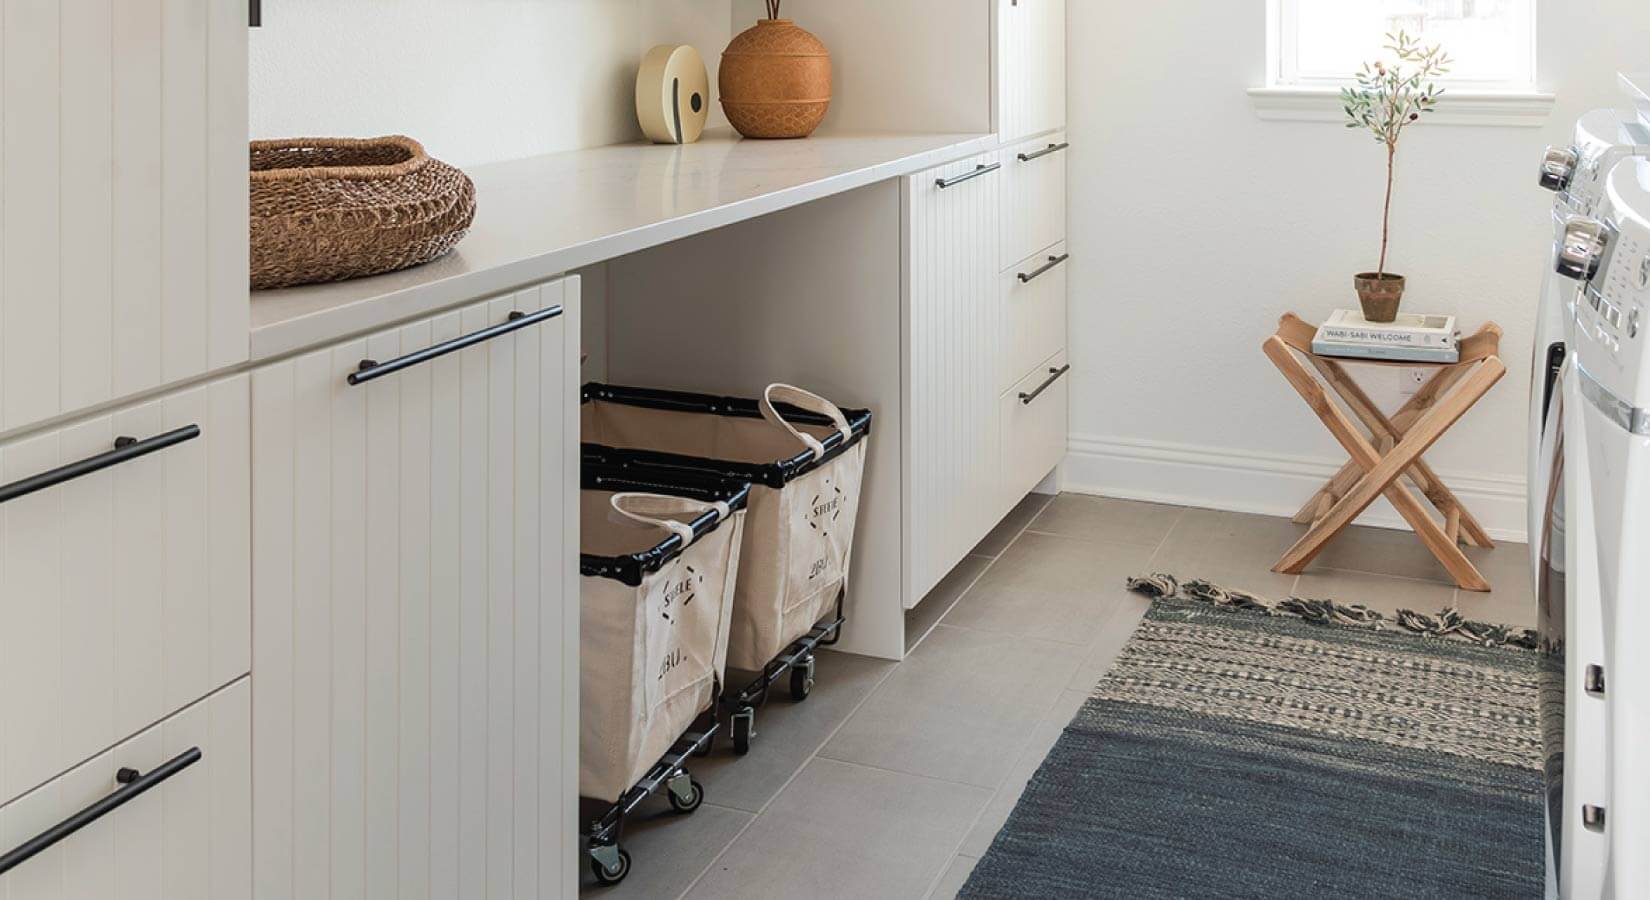 Laundry room with white beadboard cabinets, rolling laundry bins, and blue rug.